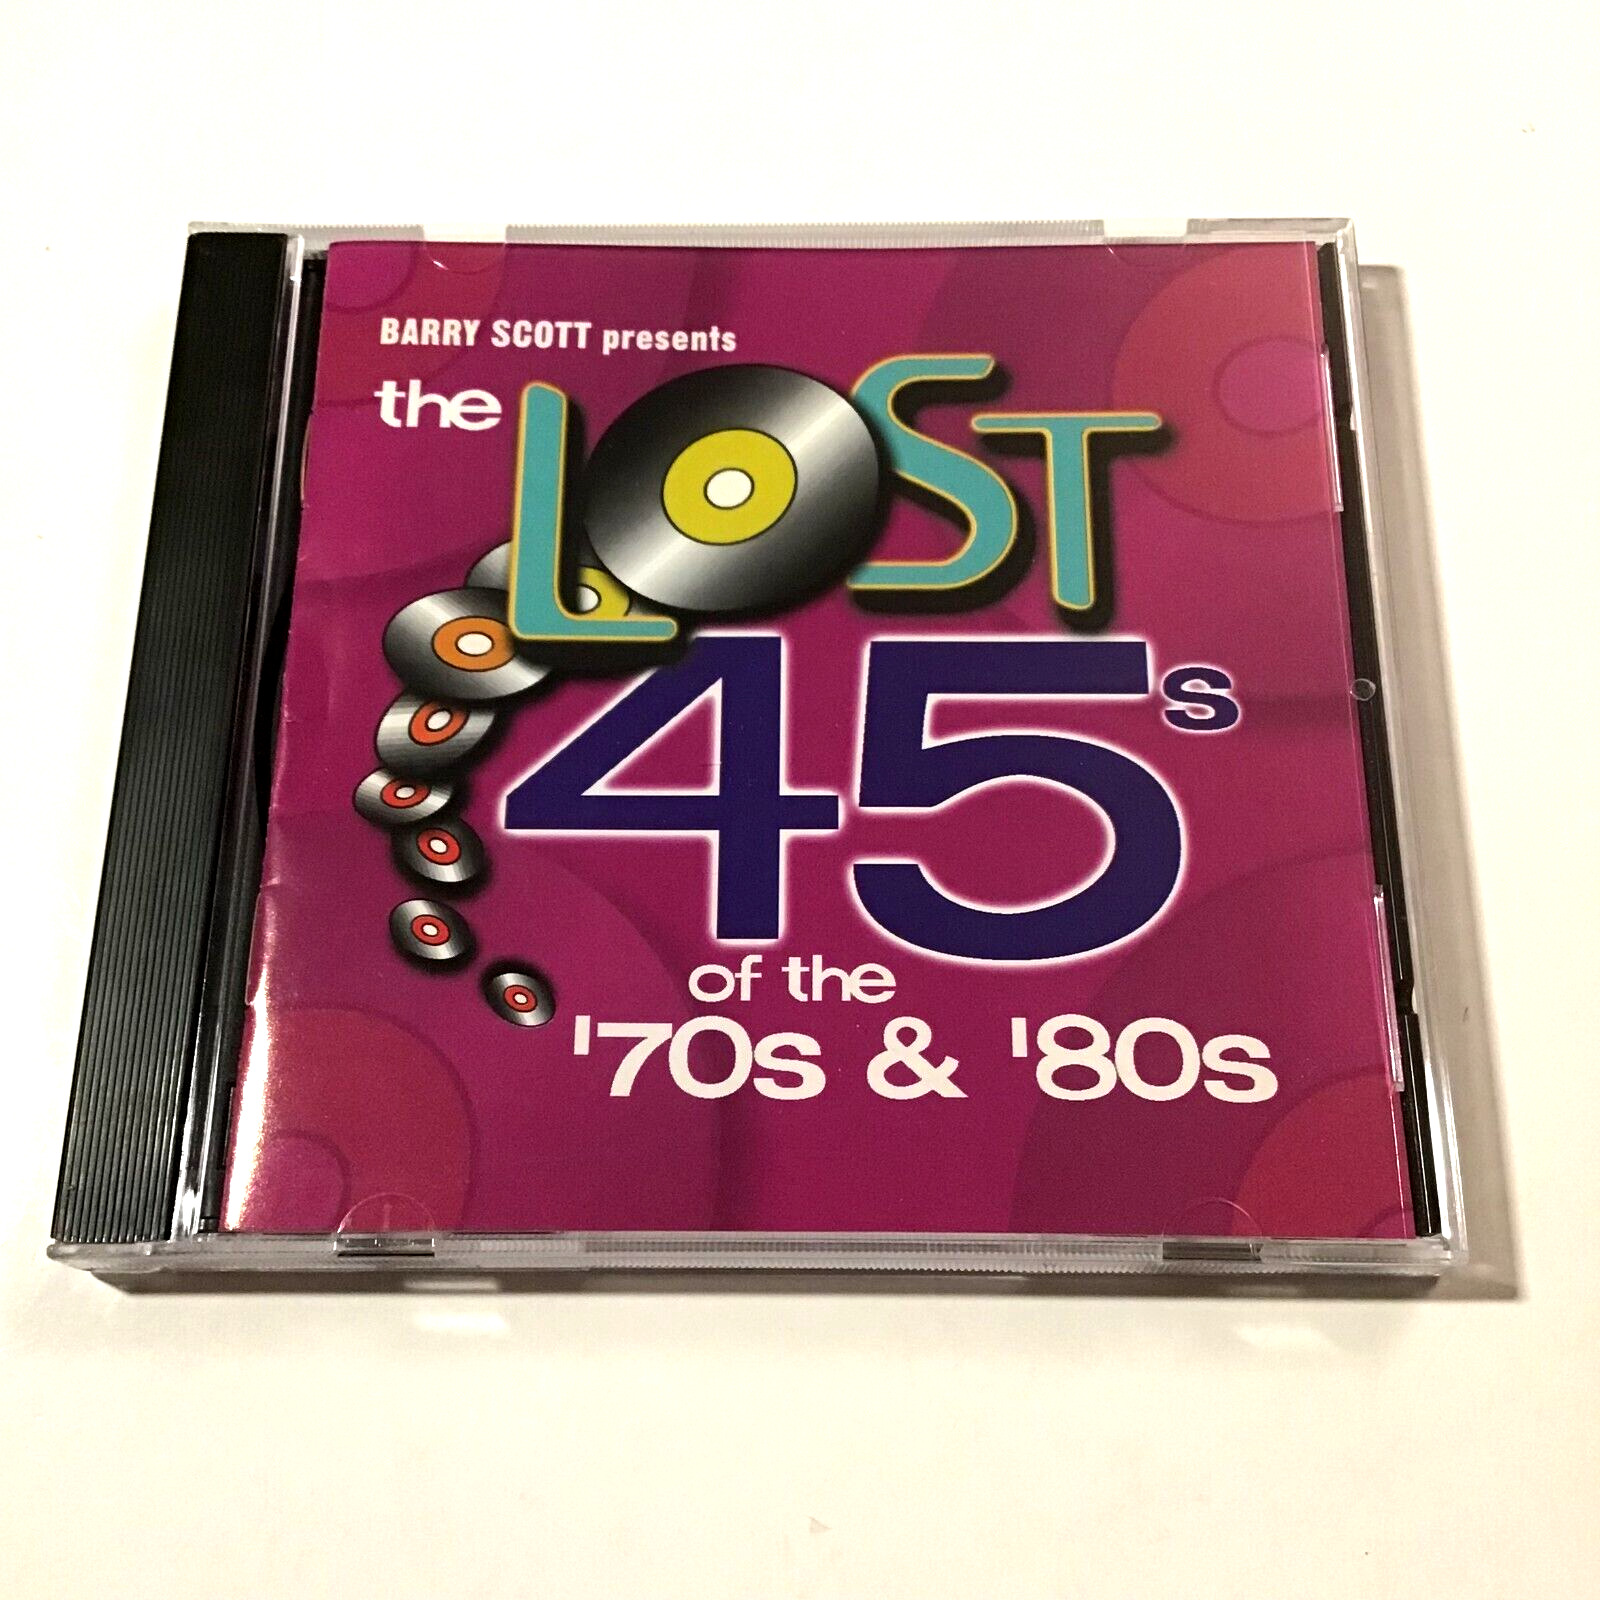 Barry Scott Presents The Lost 45s of the '70s & '80s Vol 1 (CD) Rare, Various